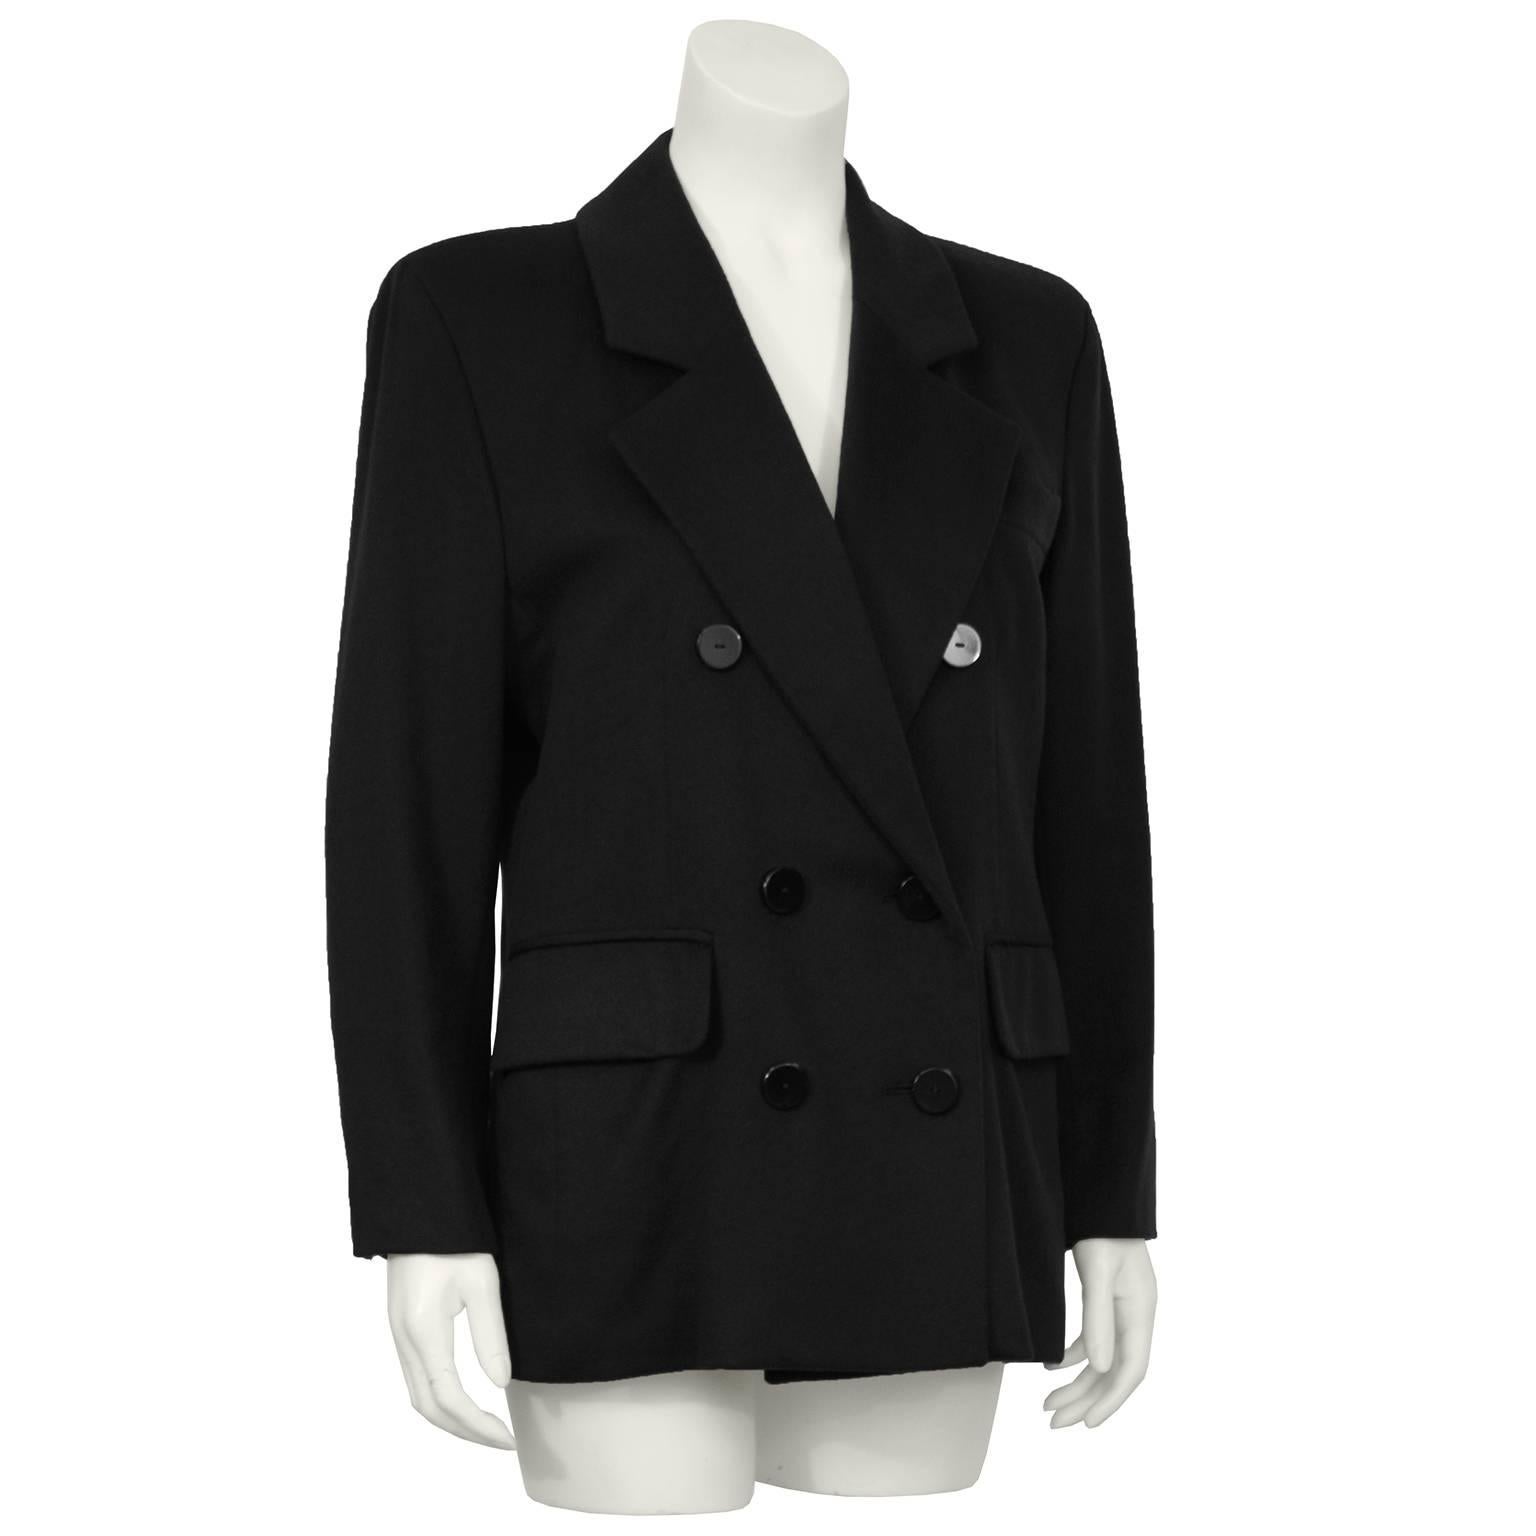 Classic double breasted cashmere blazer from Yves Saint Laurent made in the 1980's. Nothing more versatile than black cashmere to finish off today's day to evening apparel. In excellent condition fits like a US size 6.

Sleeve: 22